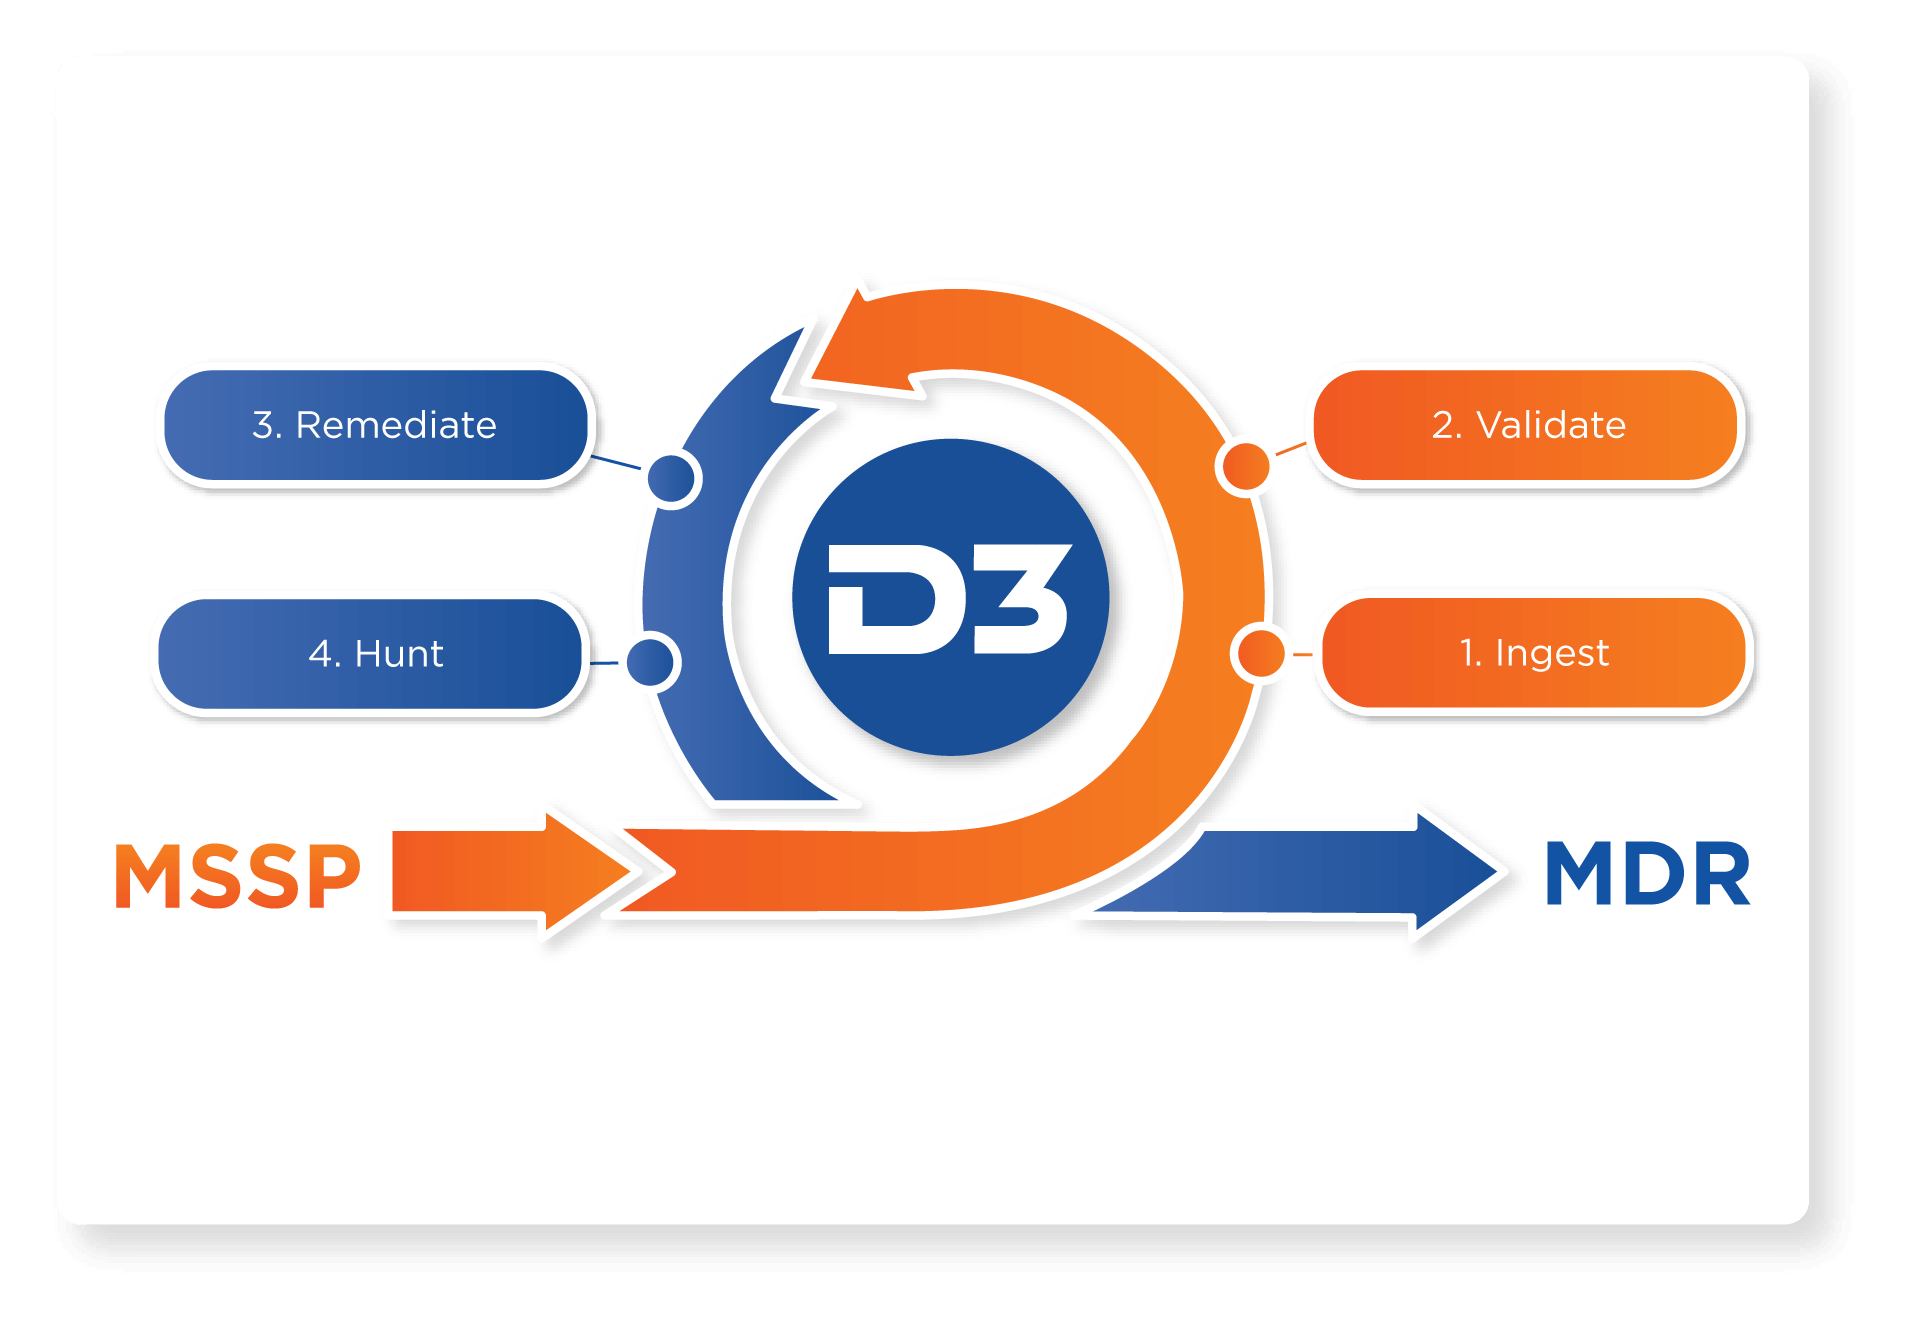 D3 helps MSSPs provide MDR services